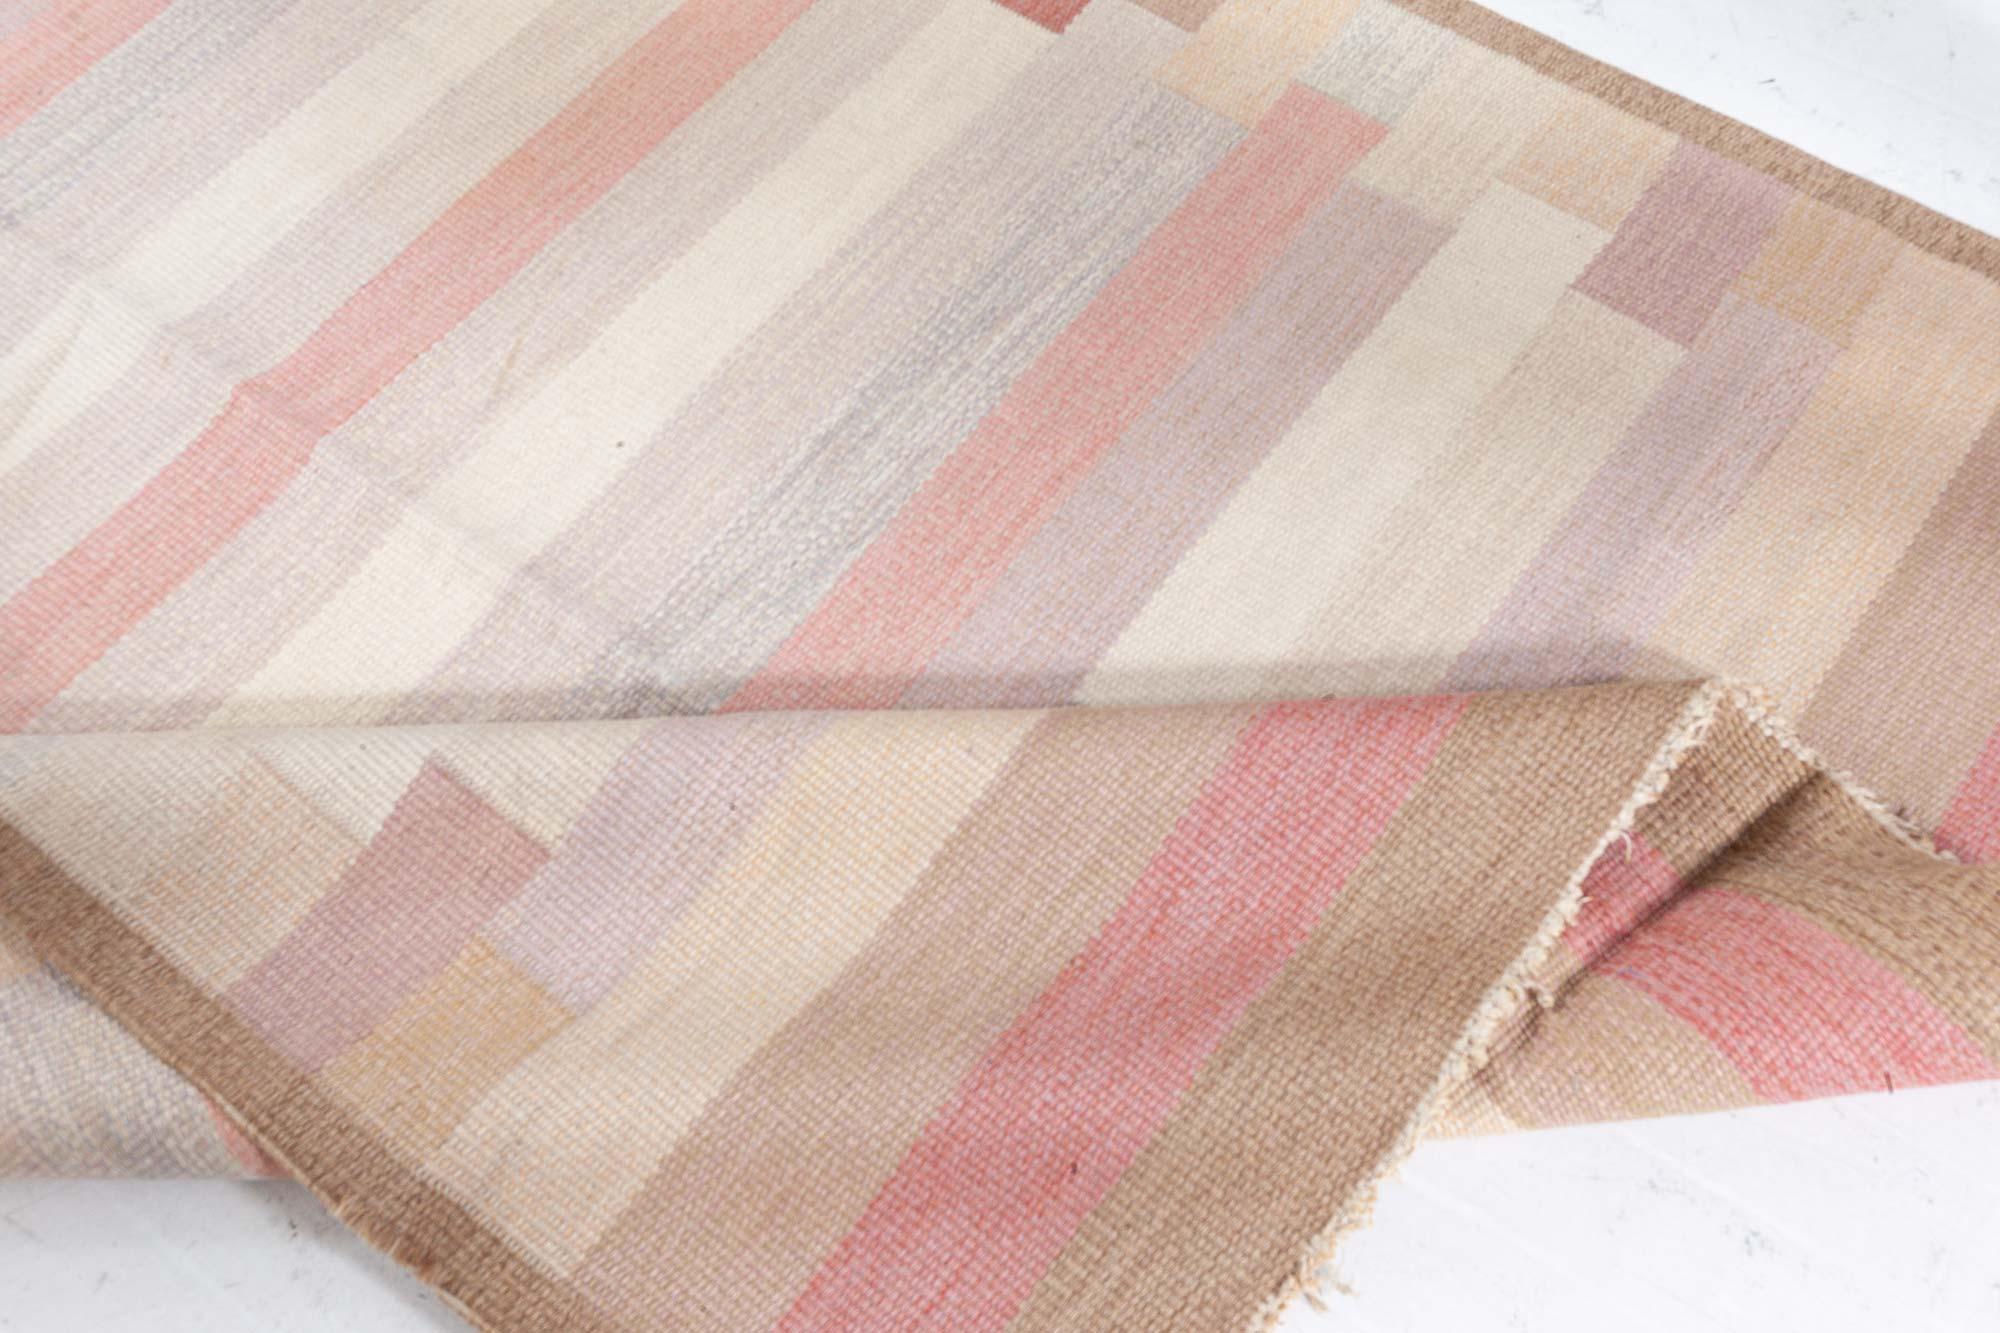 Mid-20th century Swedish Flat-Weave Rug In Good Condition For Sale In New York, NY